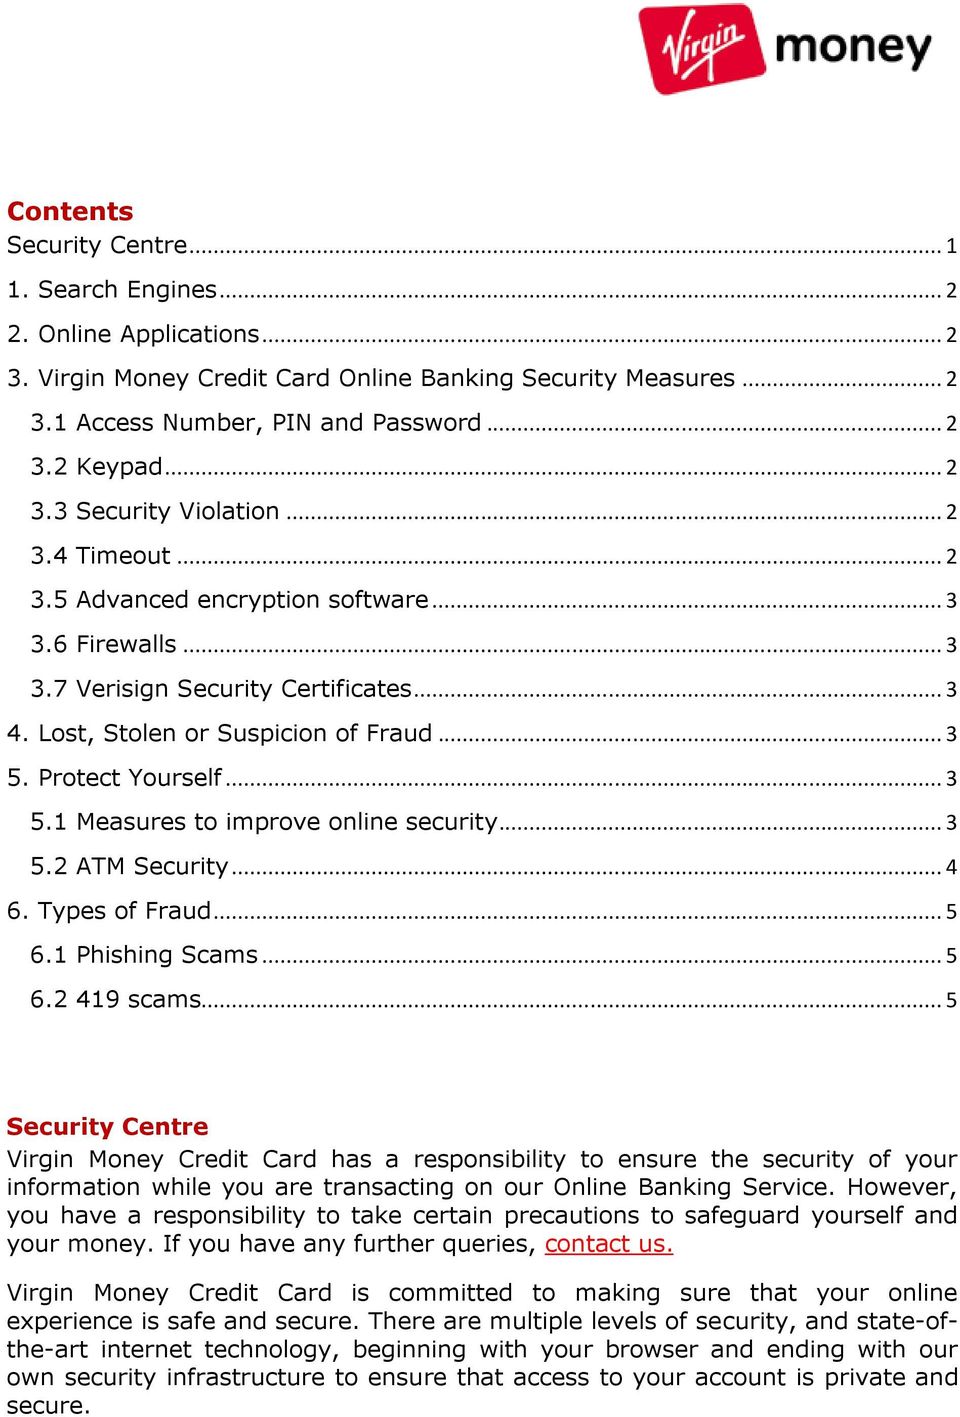 Protect Yourself... 3 5.1 Measures to improve online security... 3 5.2 ATM Security... 4 6. Types of Fraud... 5 6.1 Phishing Scams... 5 6.2 419 scams.